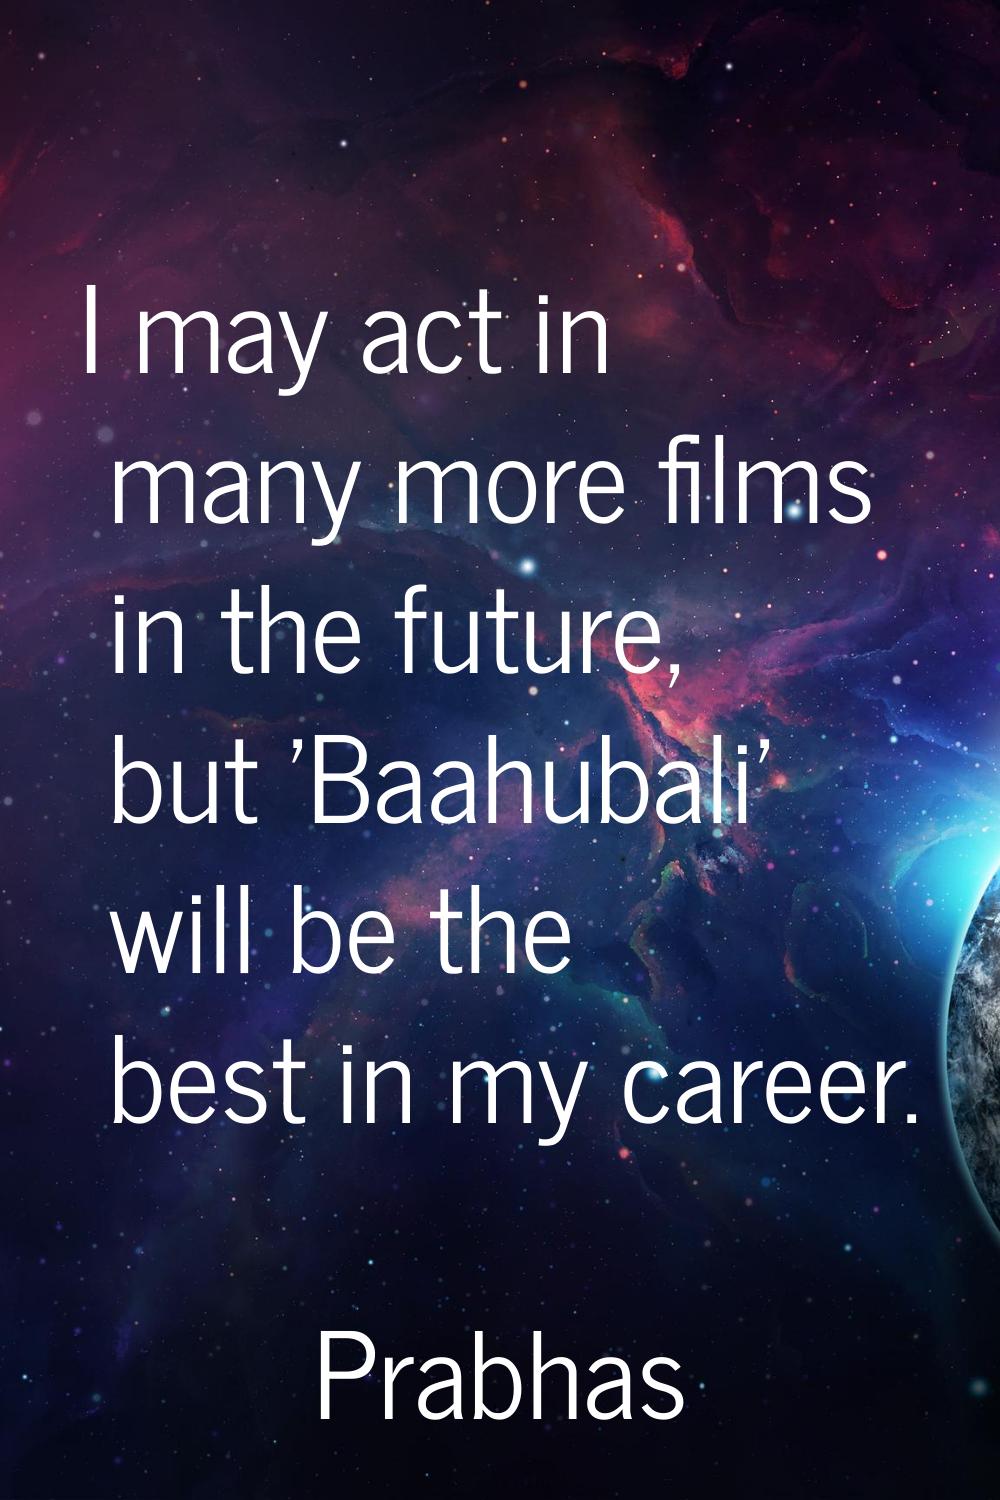 I may act in many more films in the future, but 'Baahubali' will be the best in my career.